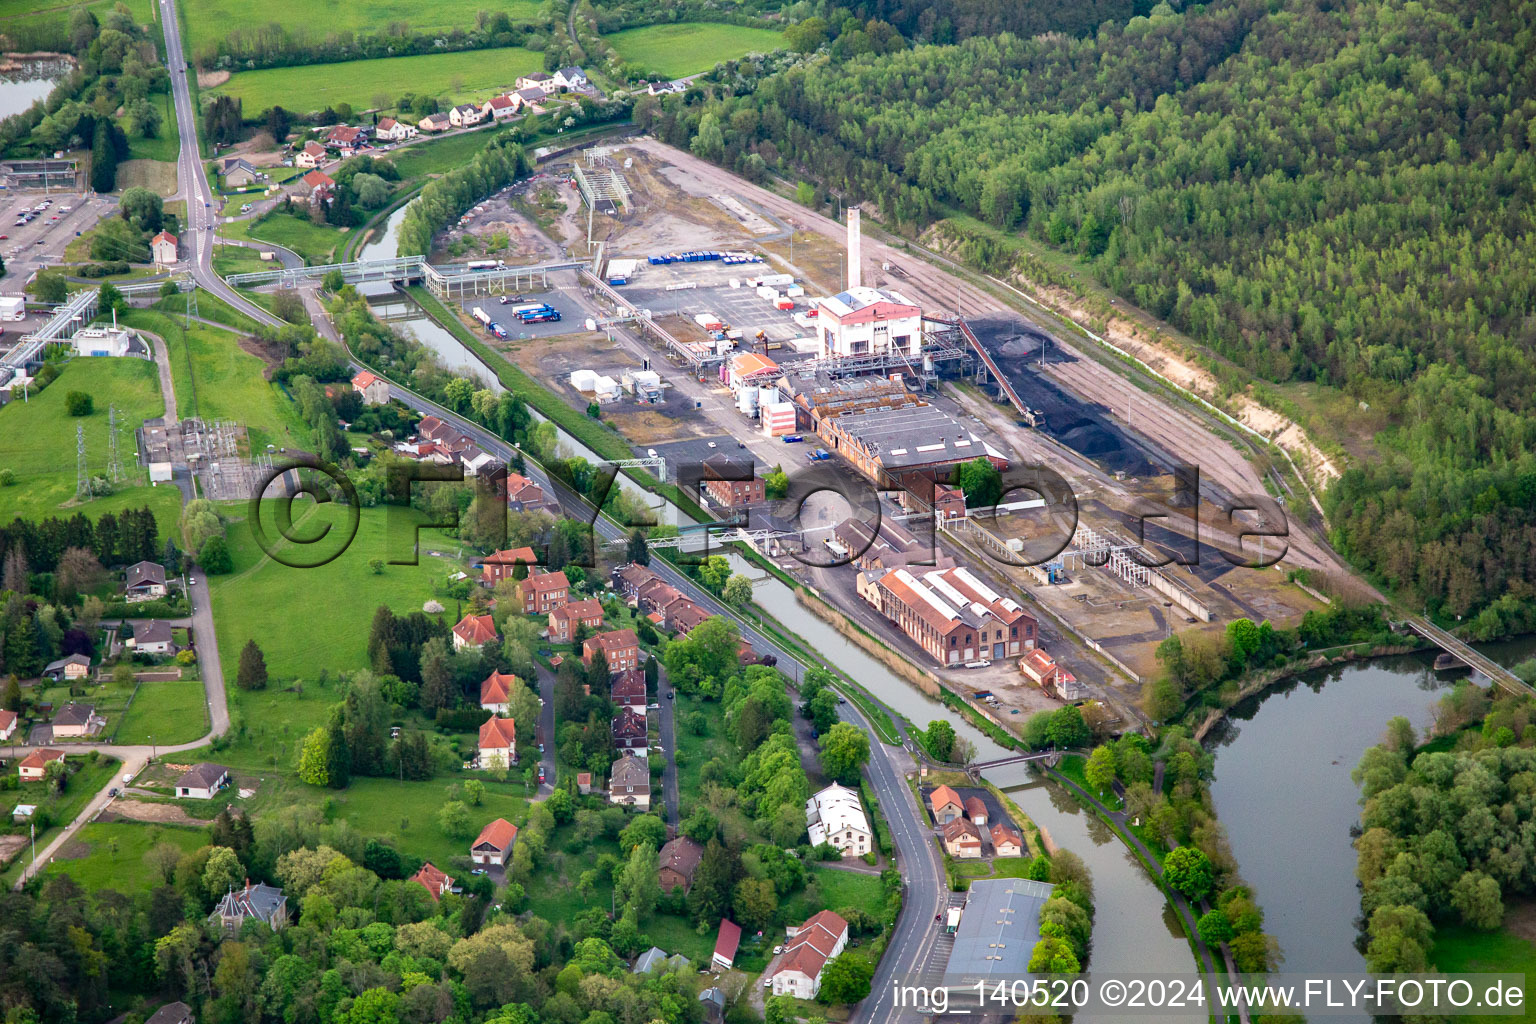 Aerial view of Industrial area Rue Ernest Solvay in Willerwald in the state Moselle, France